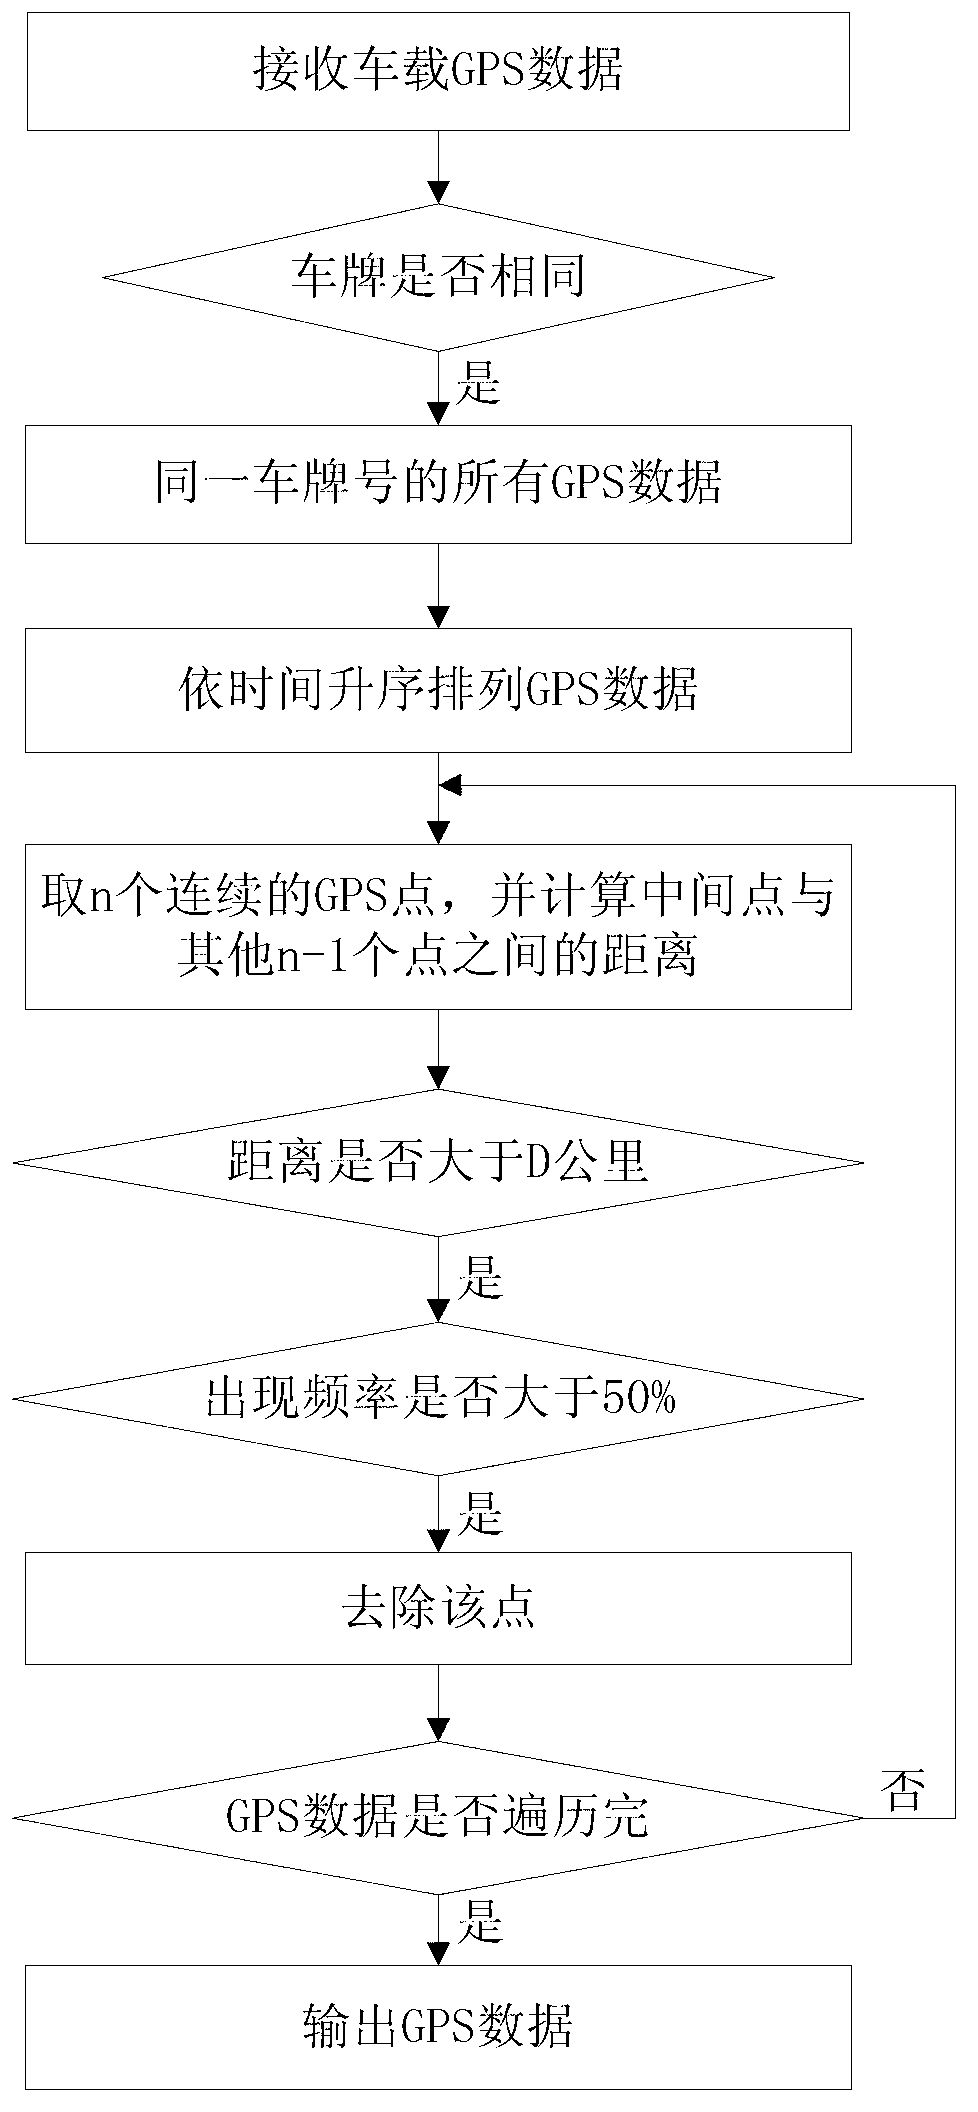 Line recommendation system and method based on Beidou satellite/GPS (global positioning system) data